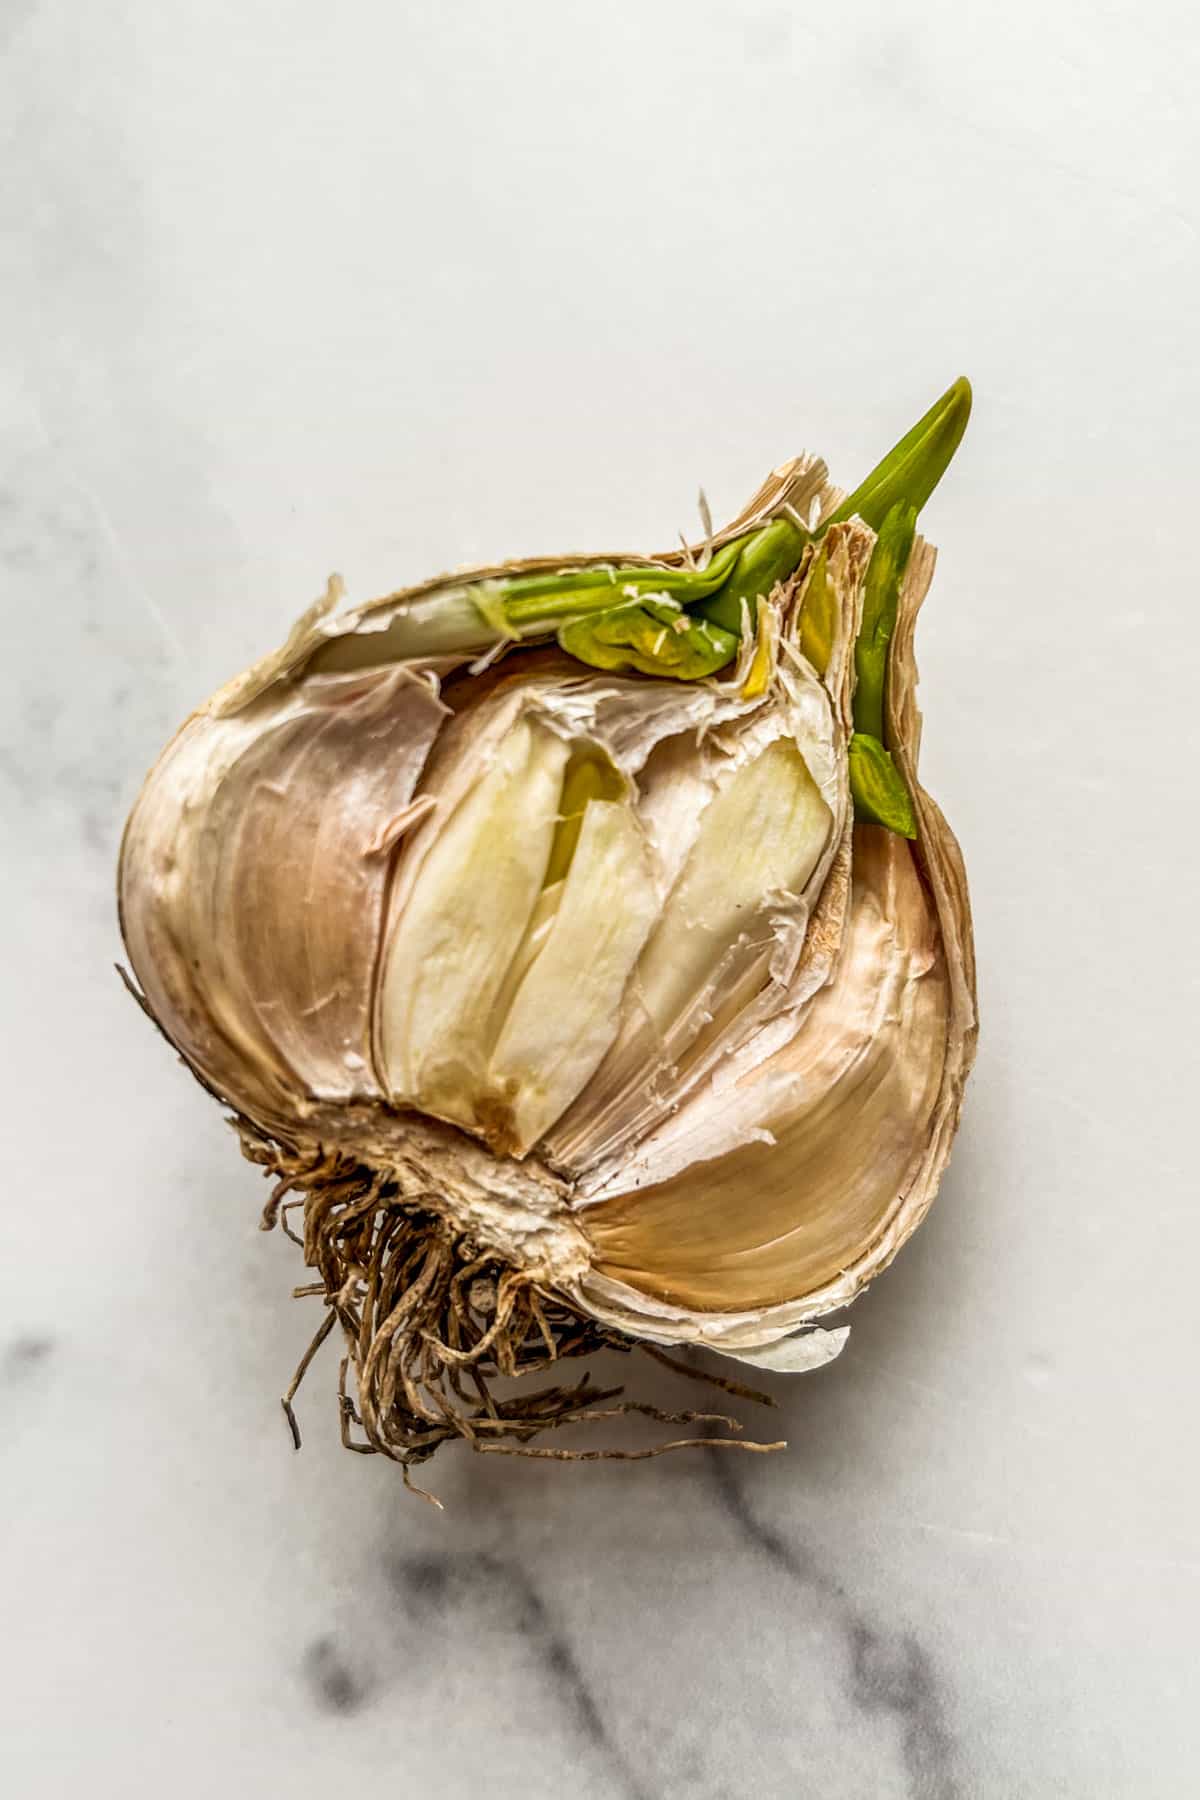 A halved head of garlic with green sprouts and dry cloves.